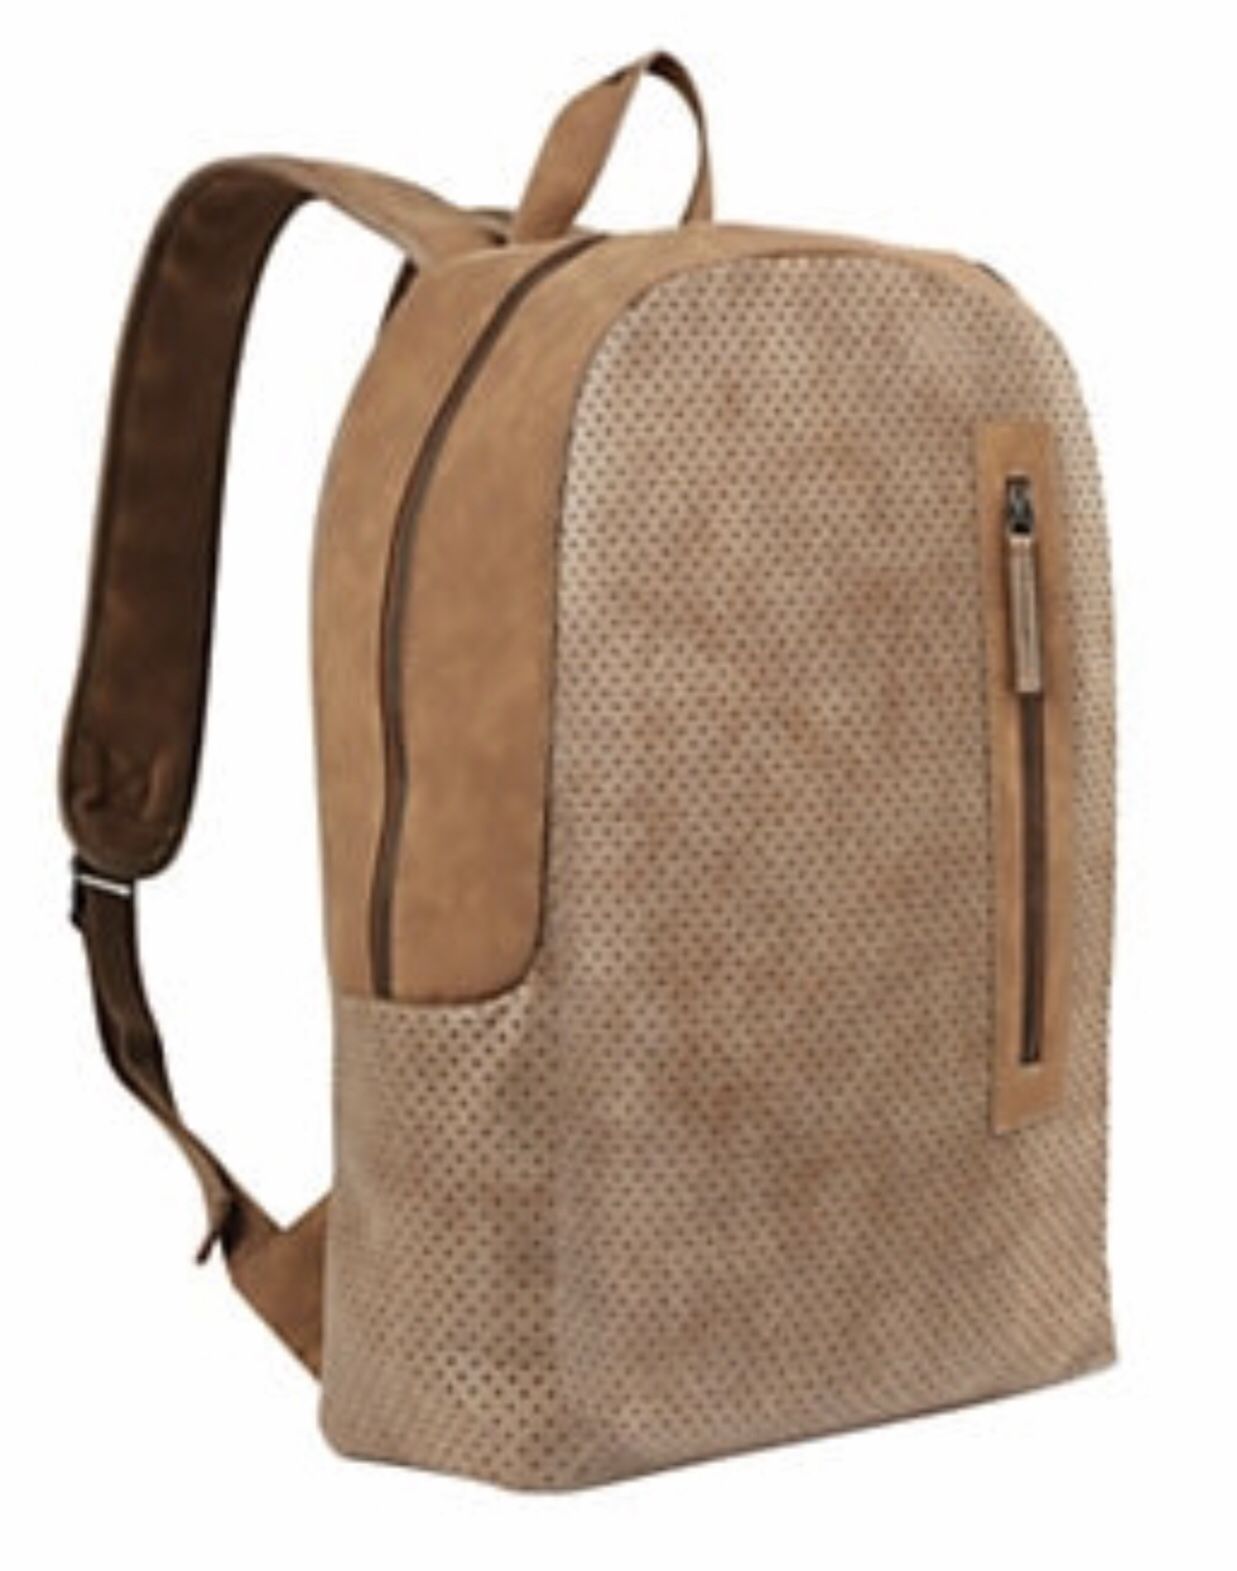 NEW - Volkano Tan Backpack with 15.6” laptop compartment